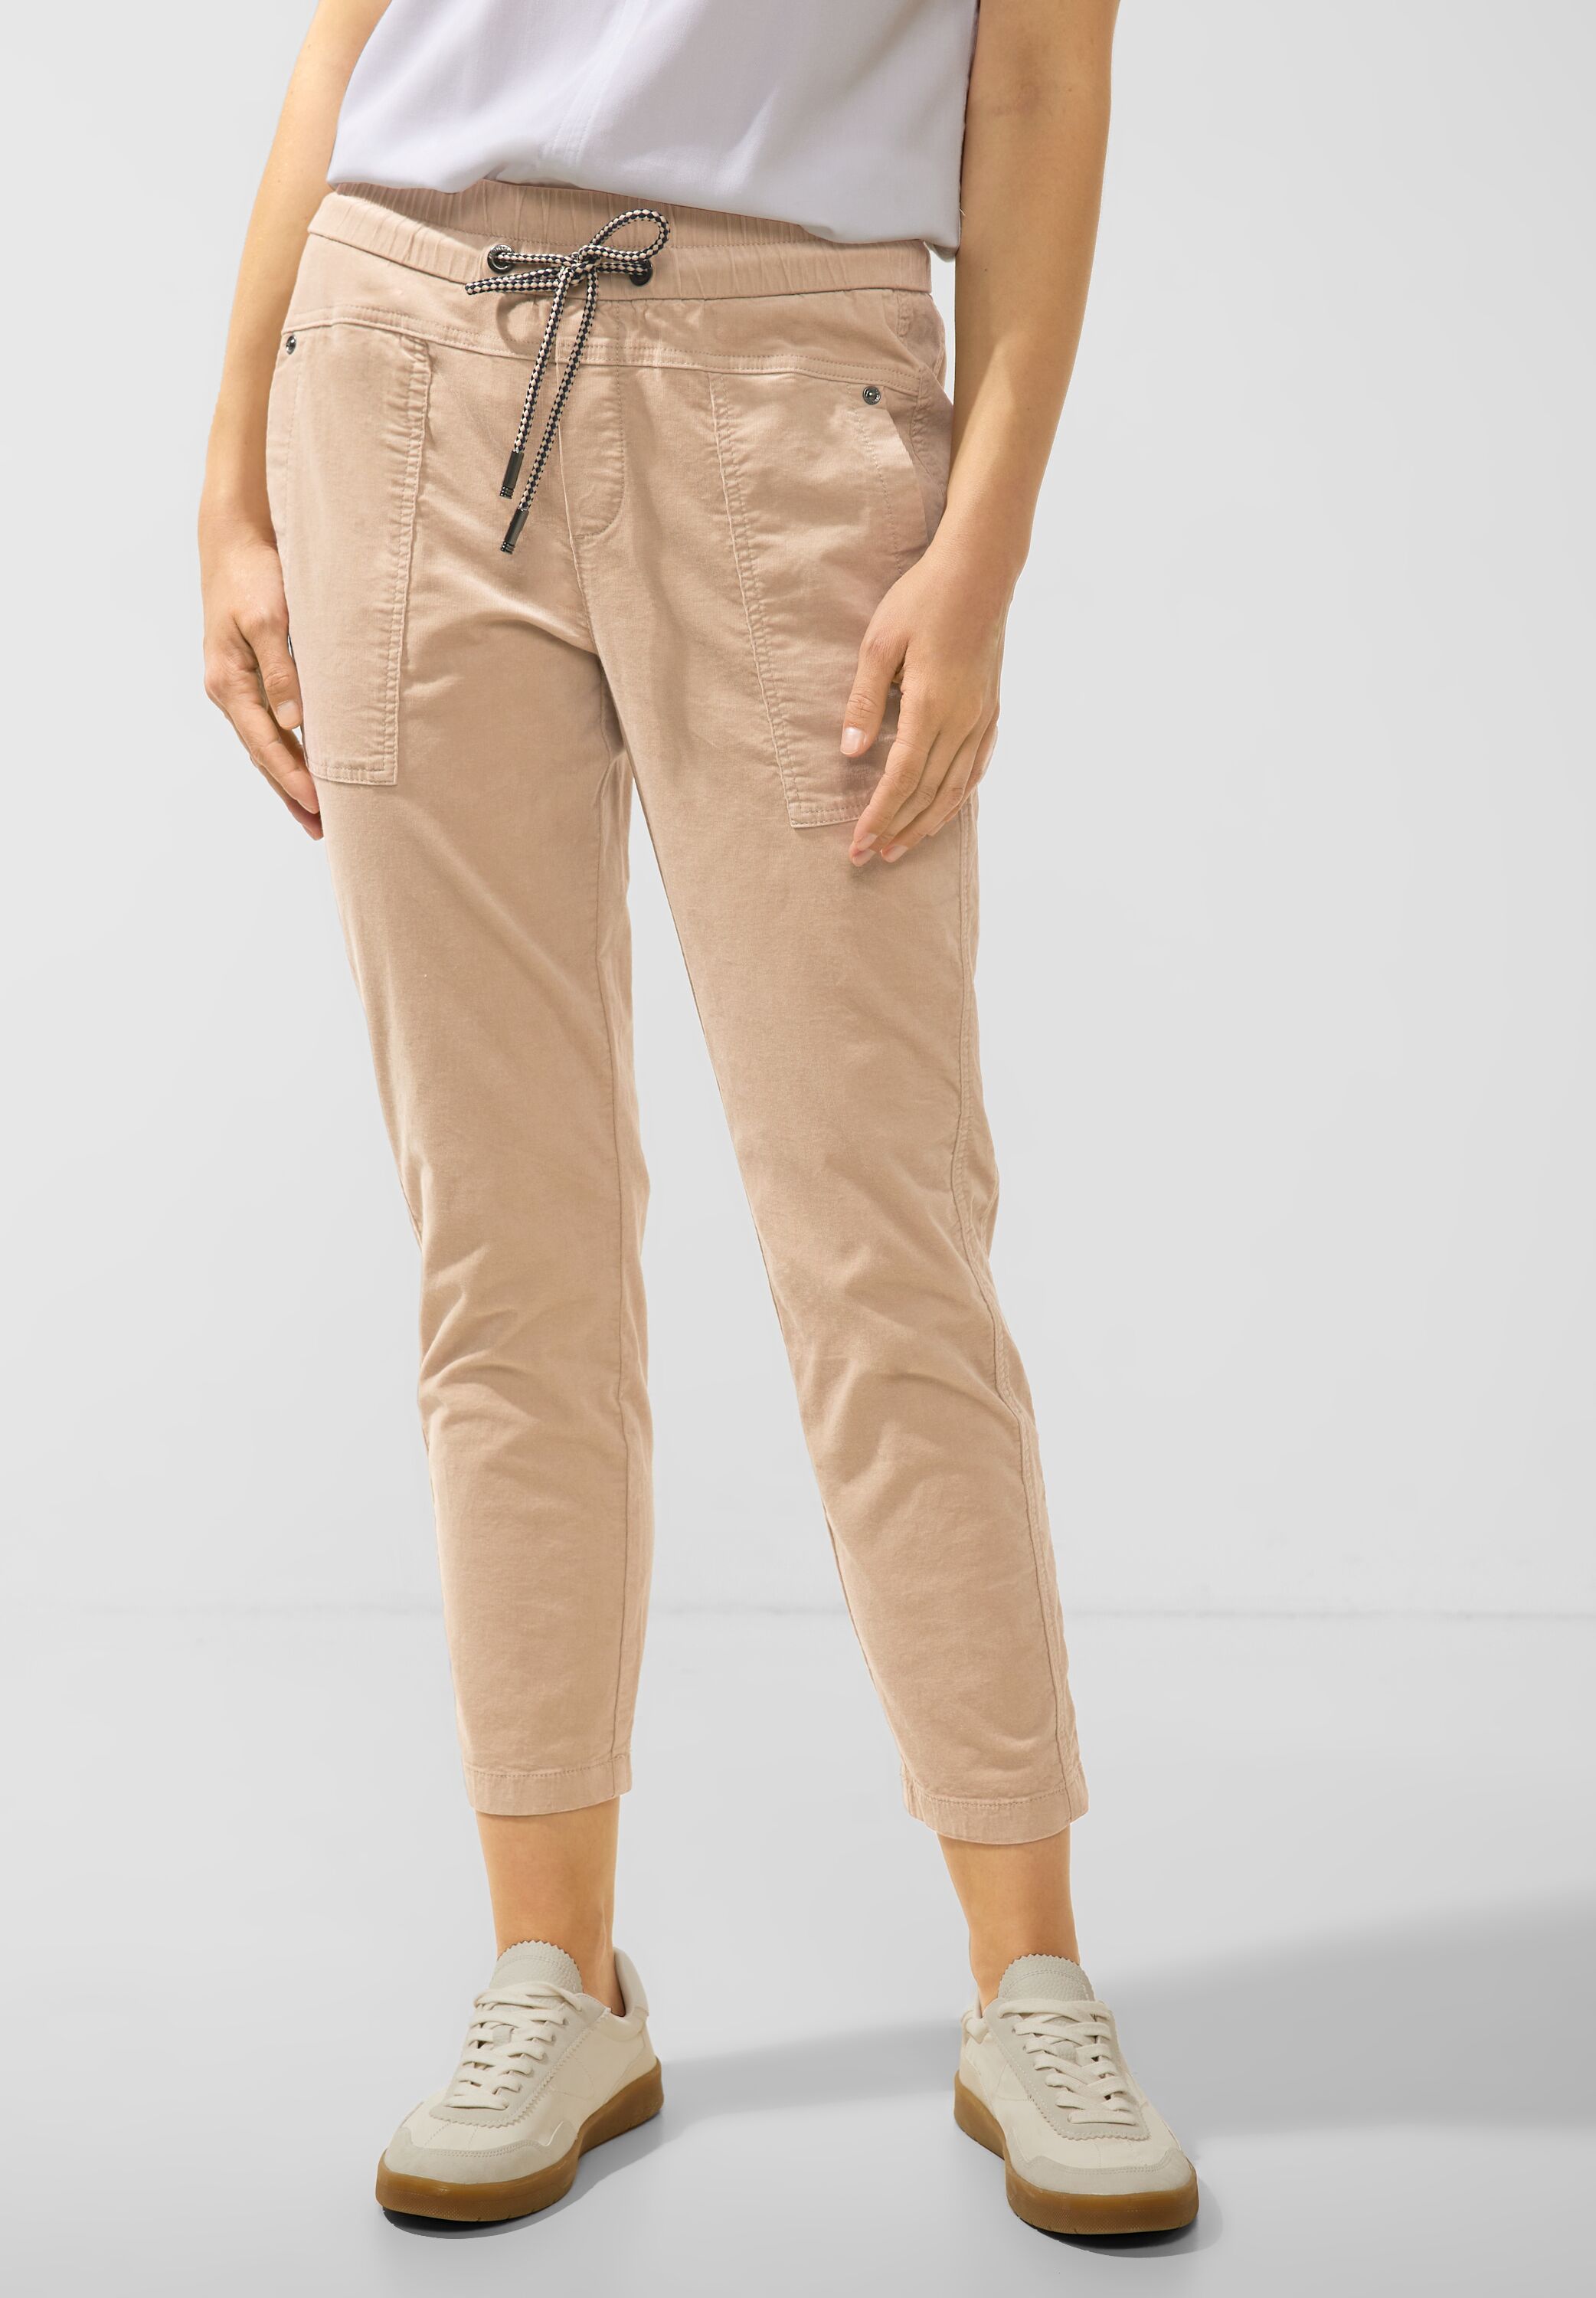 Mode Street in Bleached CONCEPT - im Sand Bonny SALE reduziert Dull A376623-14944 Cordhose One